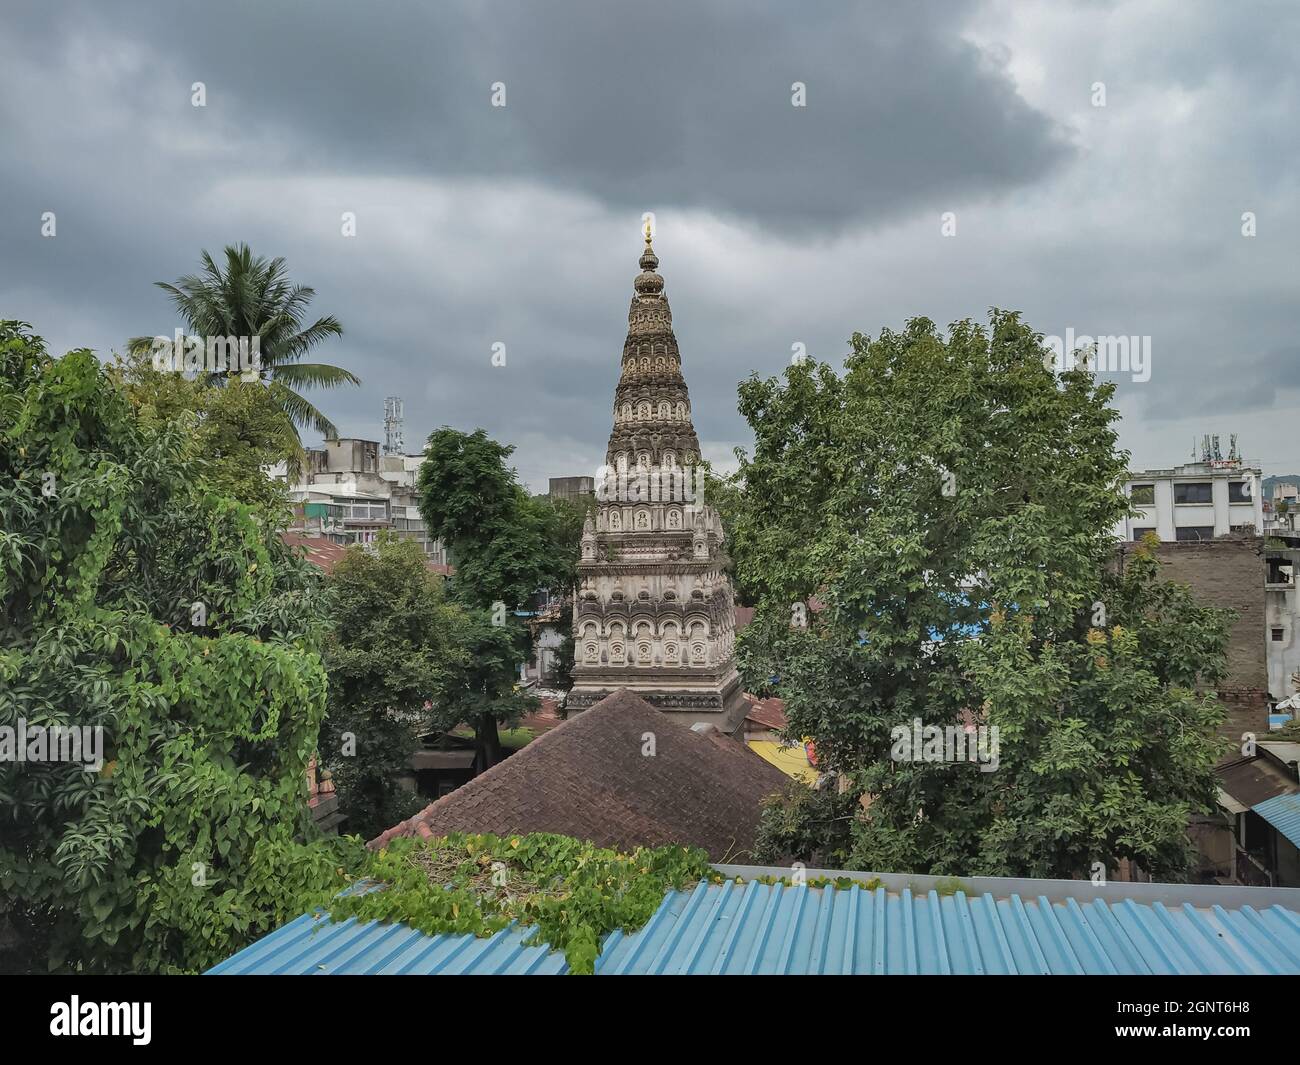 PUNE, INDIA - Aug 28, 2021: PUNE , MAHARASHTRA , INDIA - AUGUST 28, 2021 : Ram Temple in Tulshibaug , Pune. Old temple with trees all around. Stock Photo